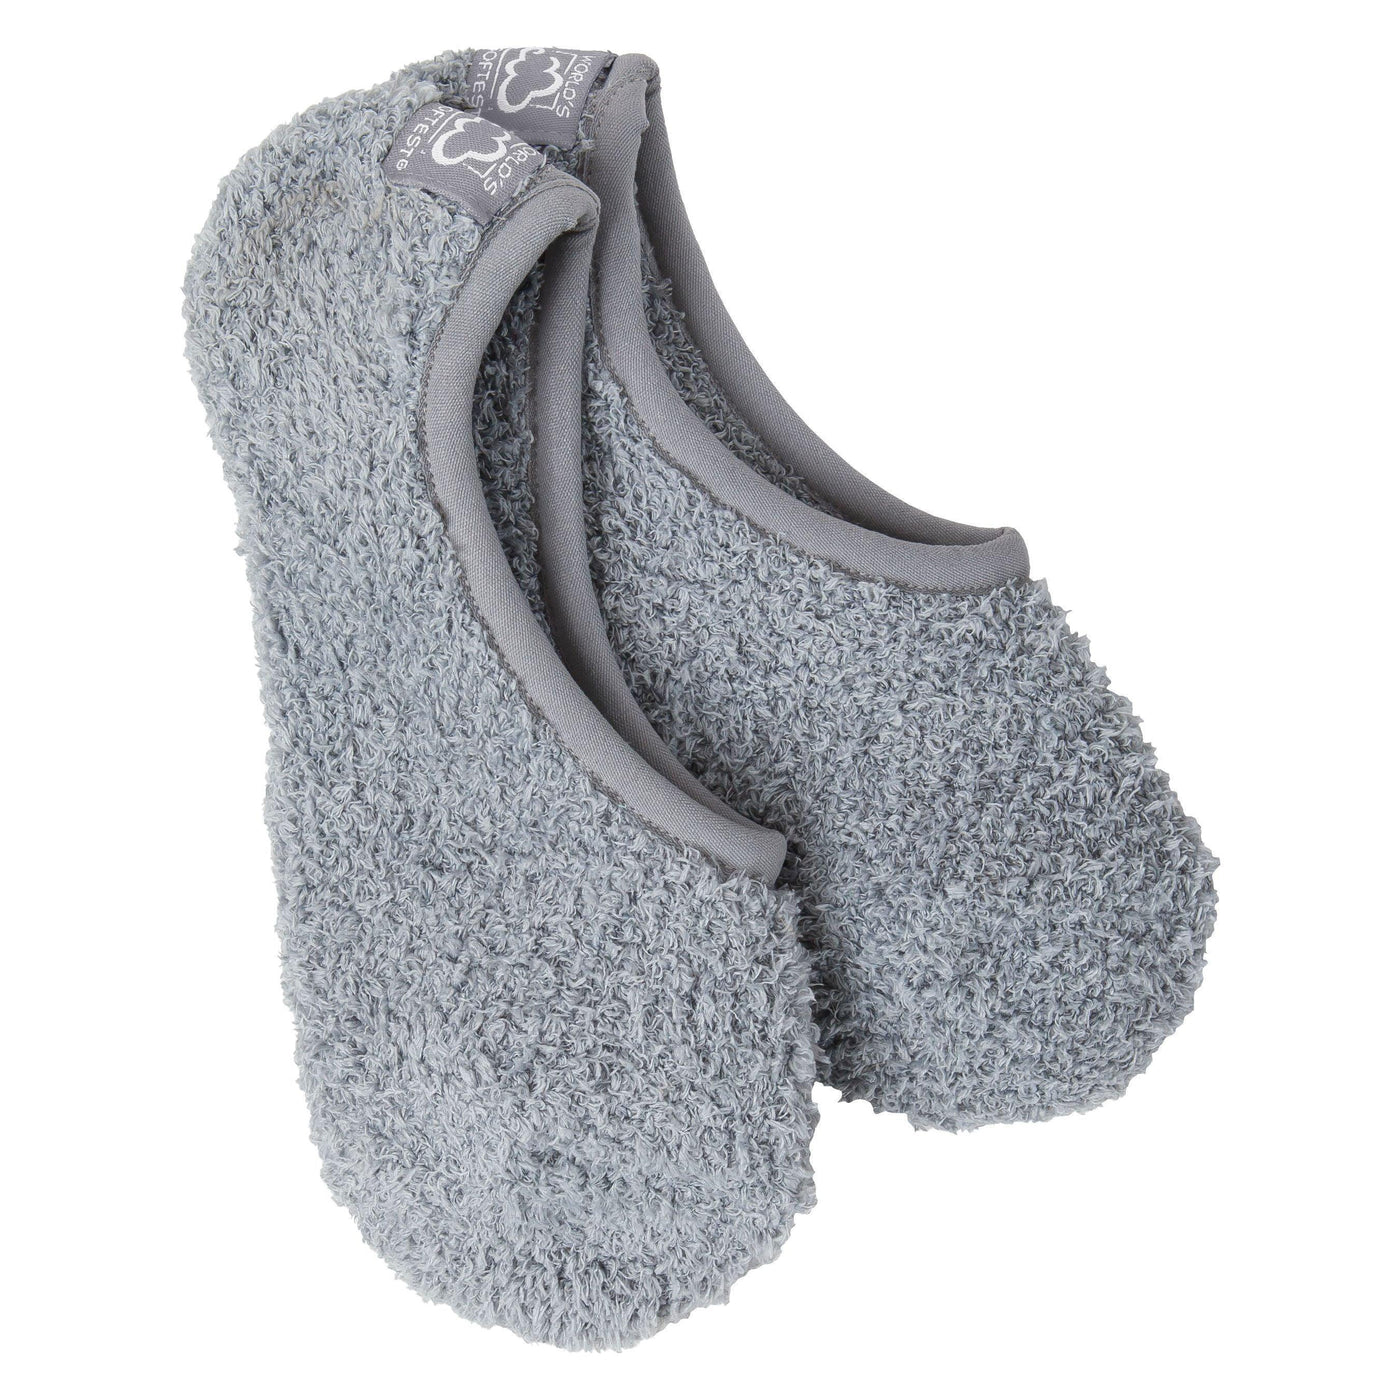 Footies, Cozy Collection - World's Softest - The Sock Monster